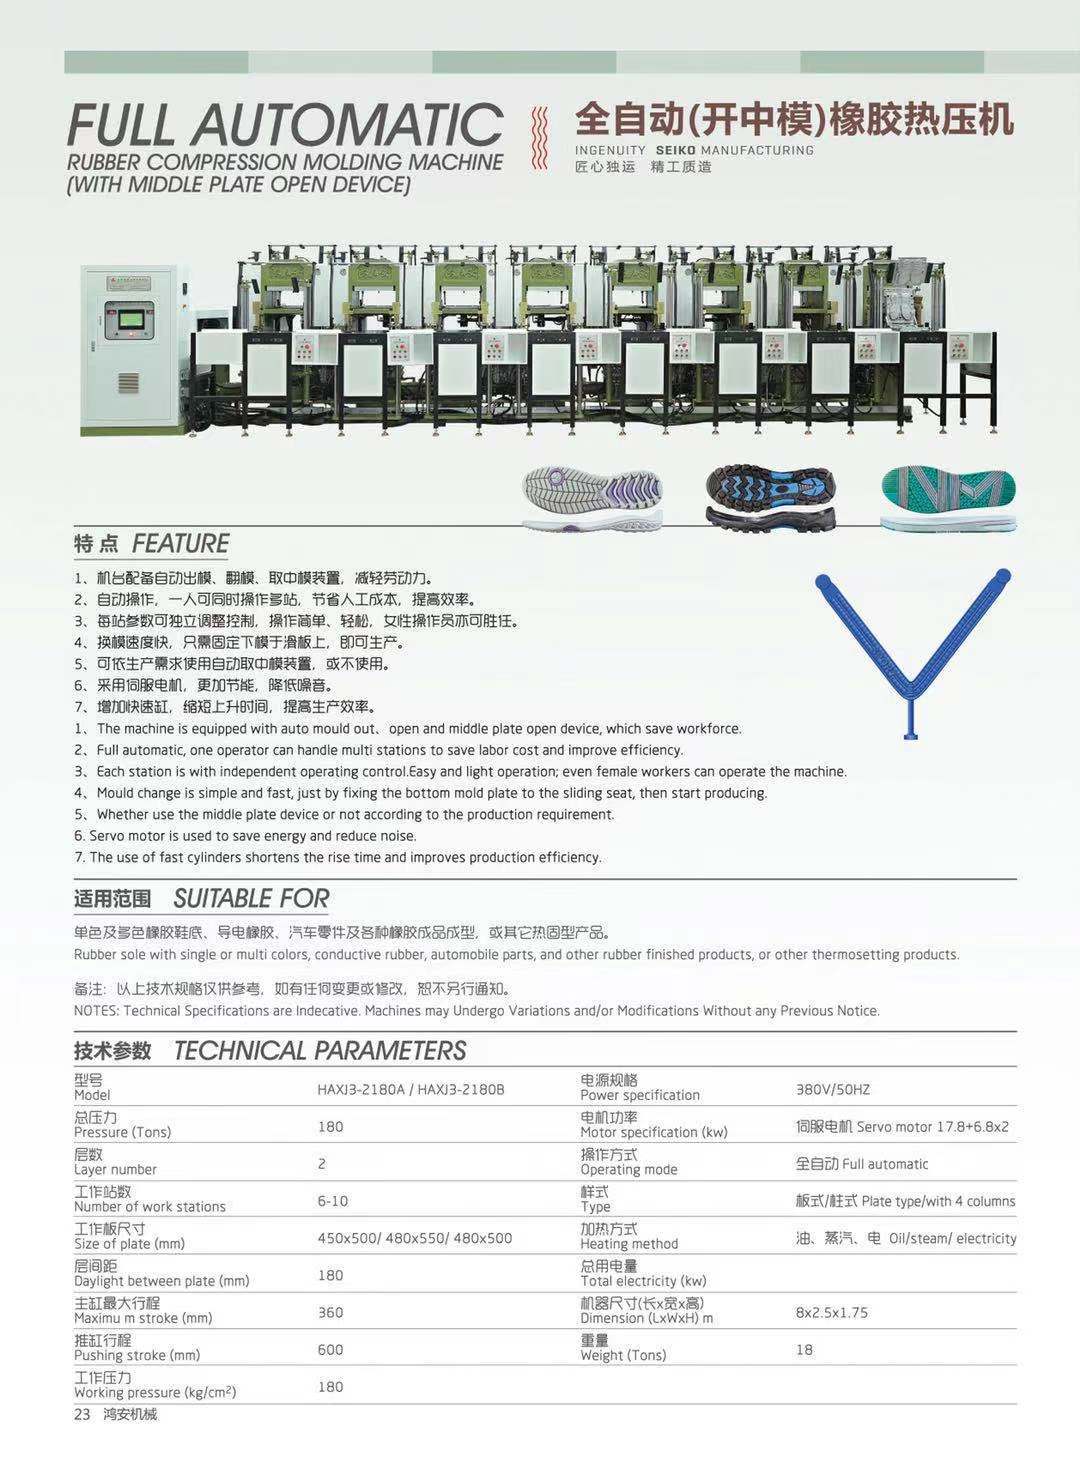 Fully automatic rubber sole compression molding machine (with middle plate open device)